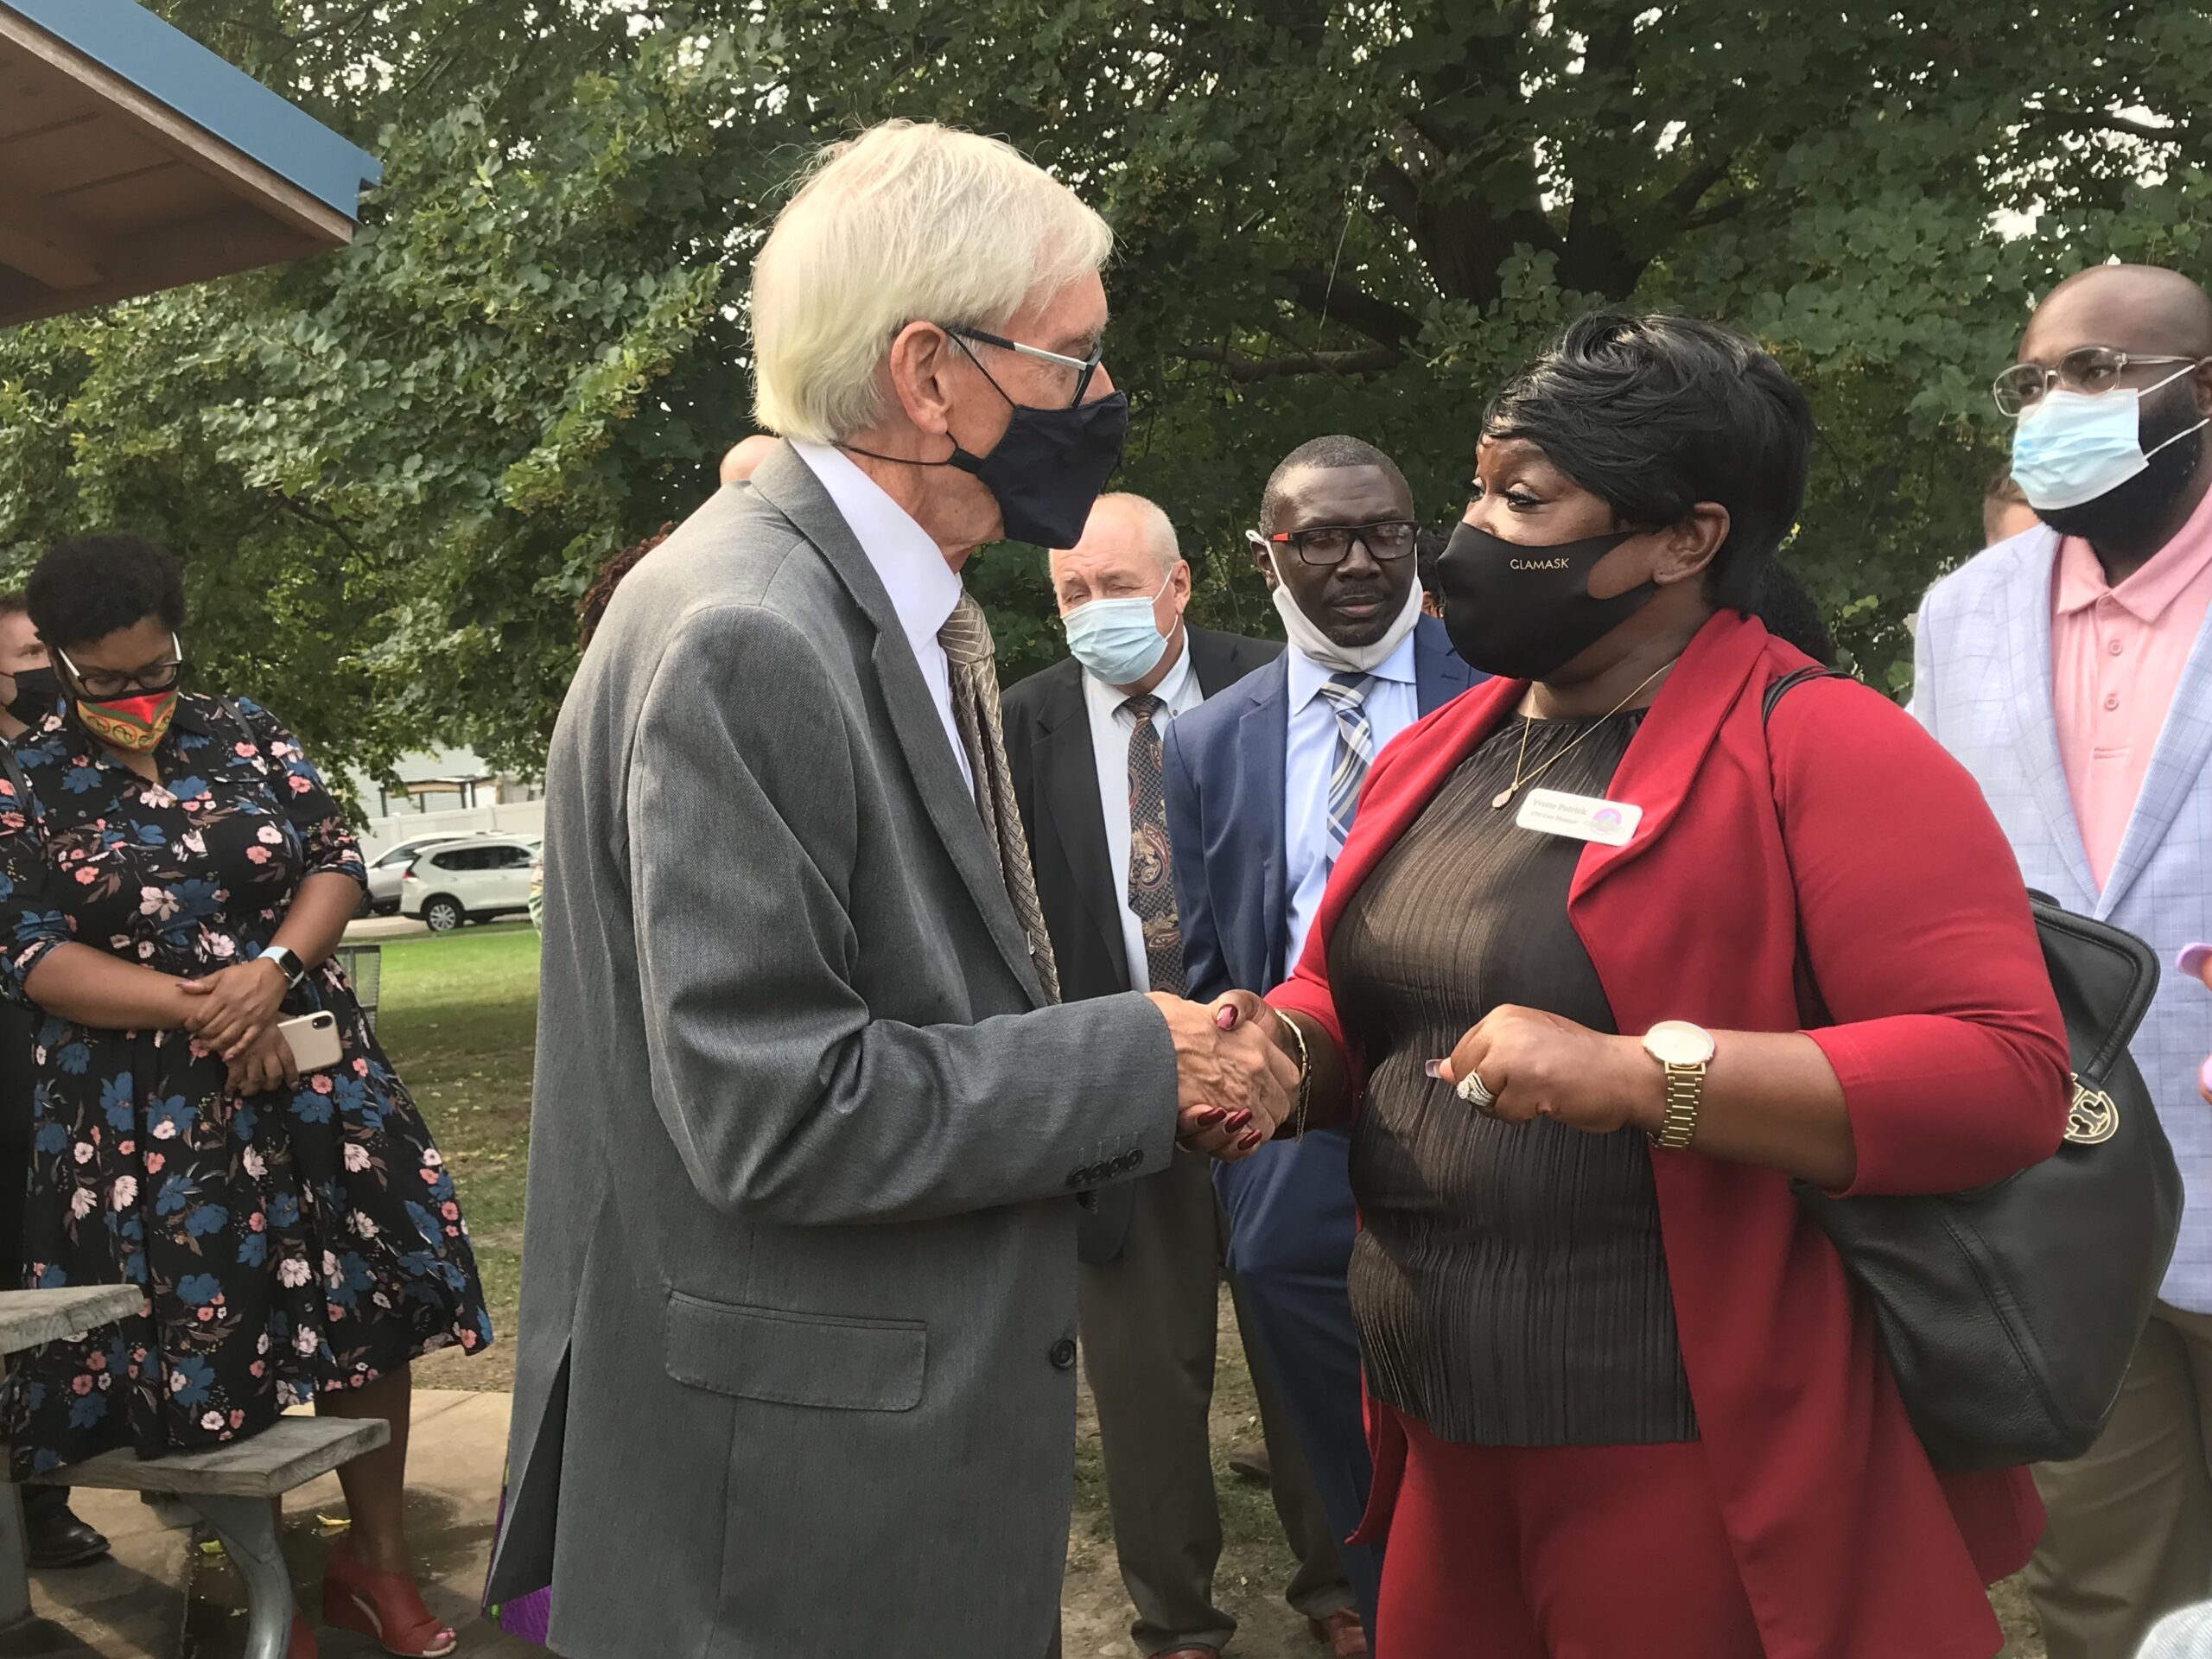 Governor Tony Evers, left, shakes the hand of Yvette Patrick, right, a Milwaukee woman who received a pardon.